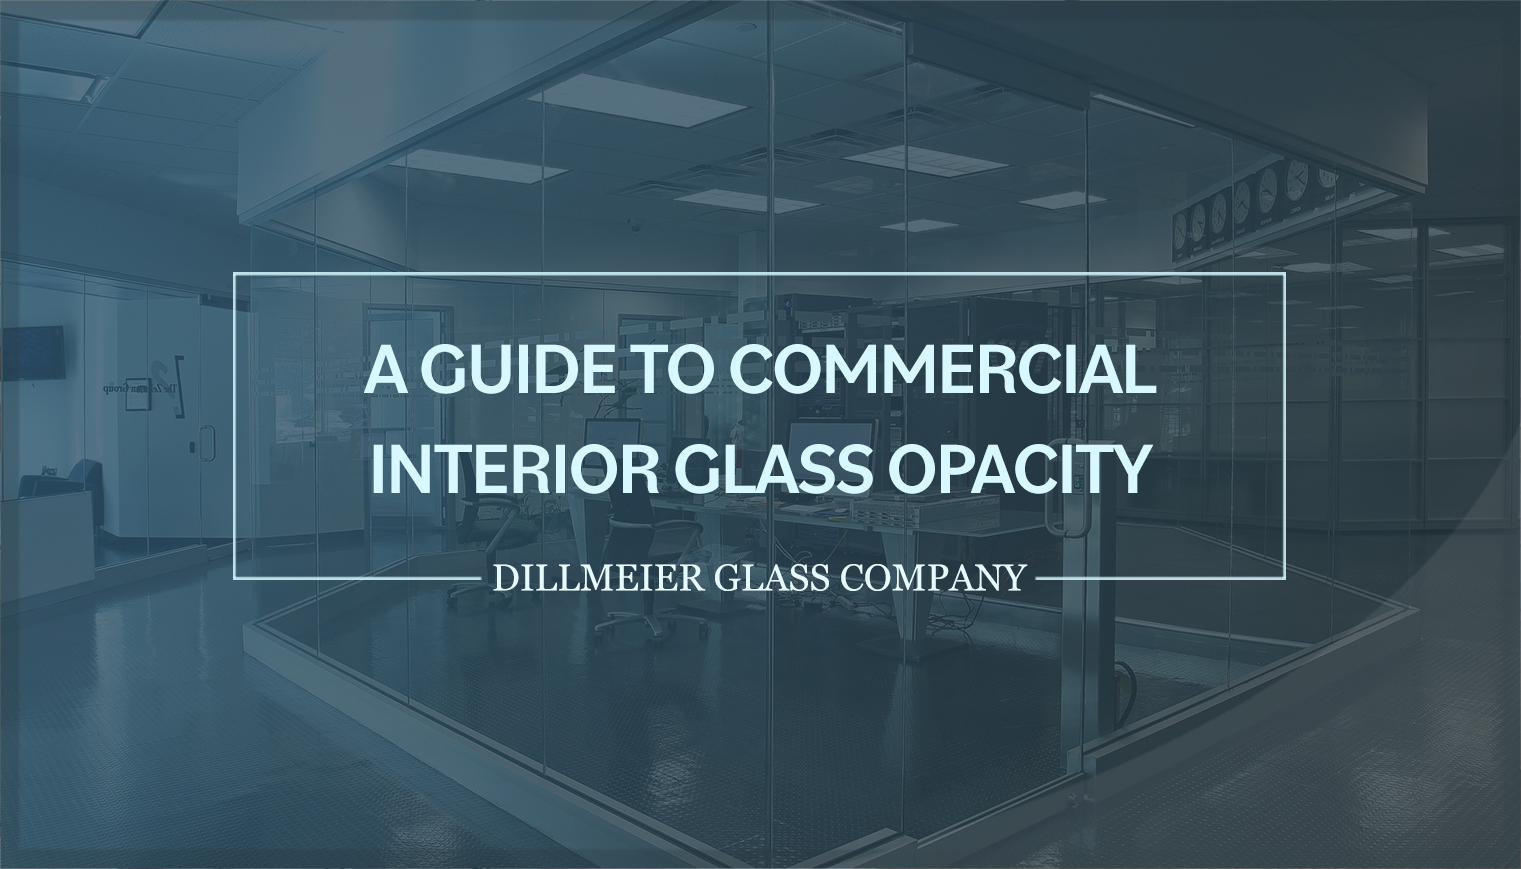 A Guide to Commercial Interior Glass Opacity